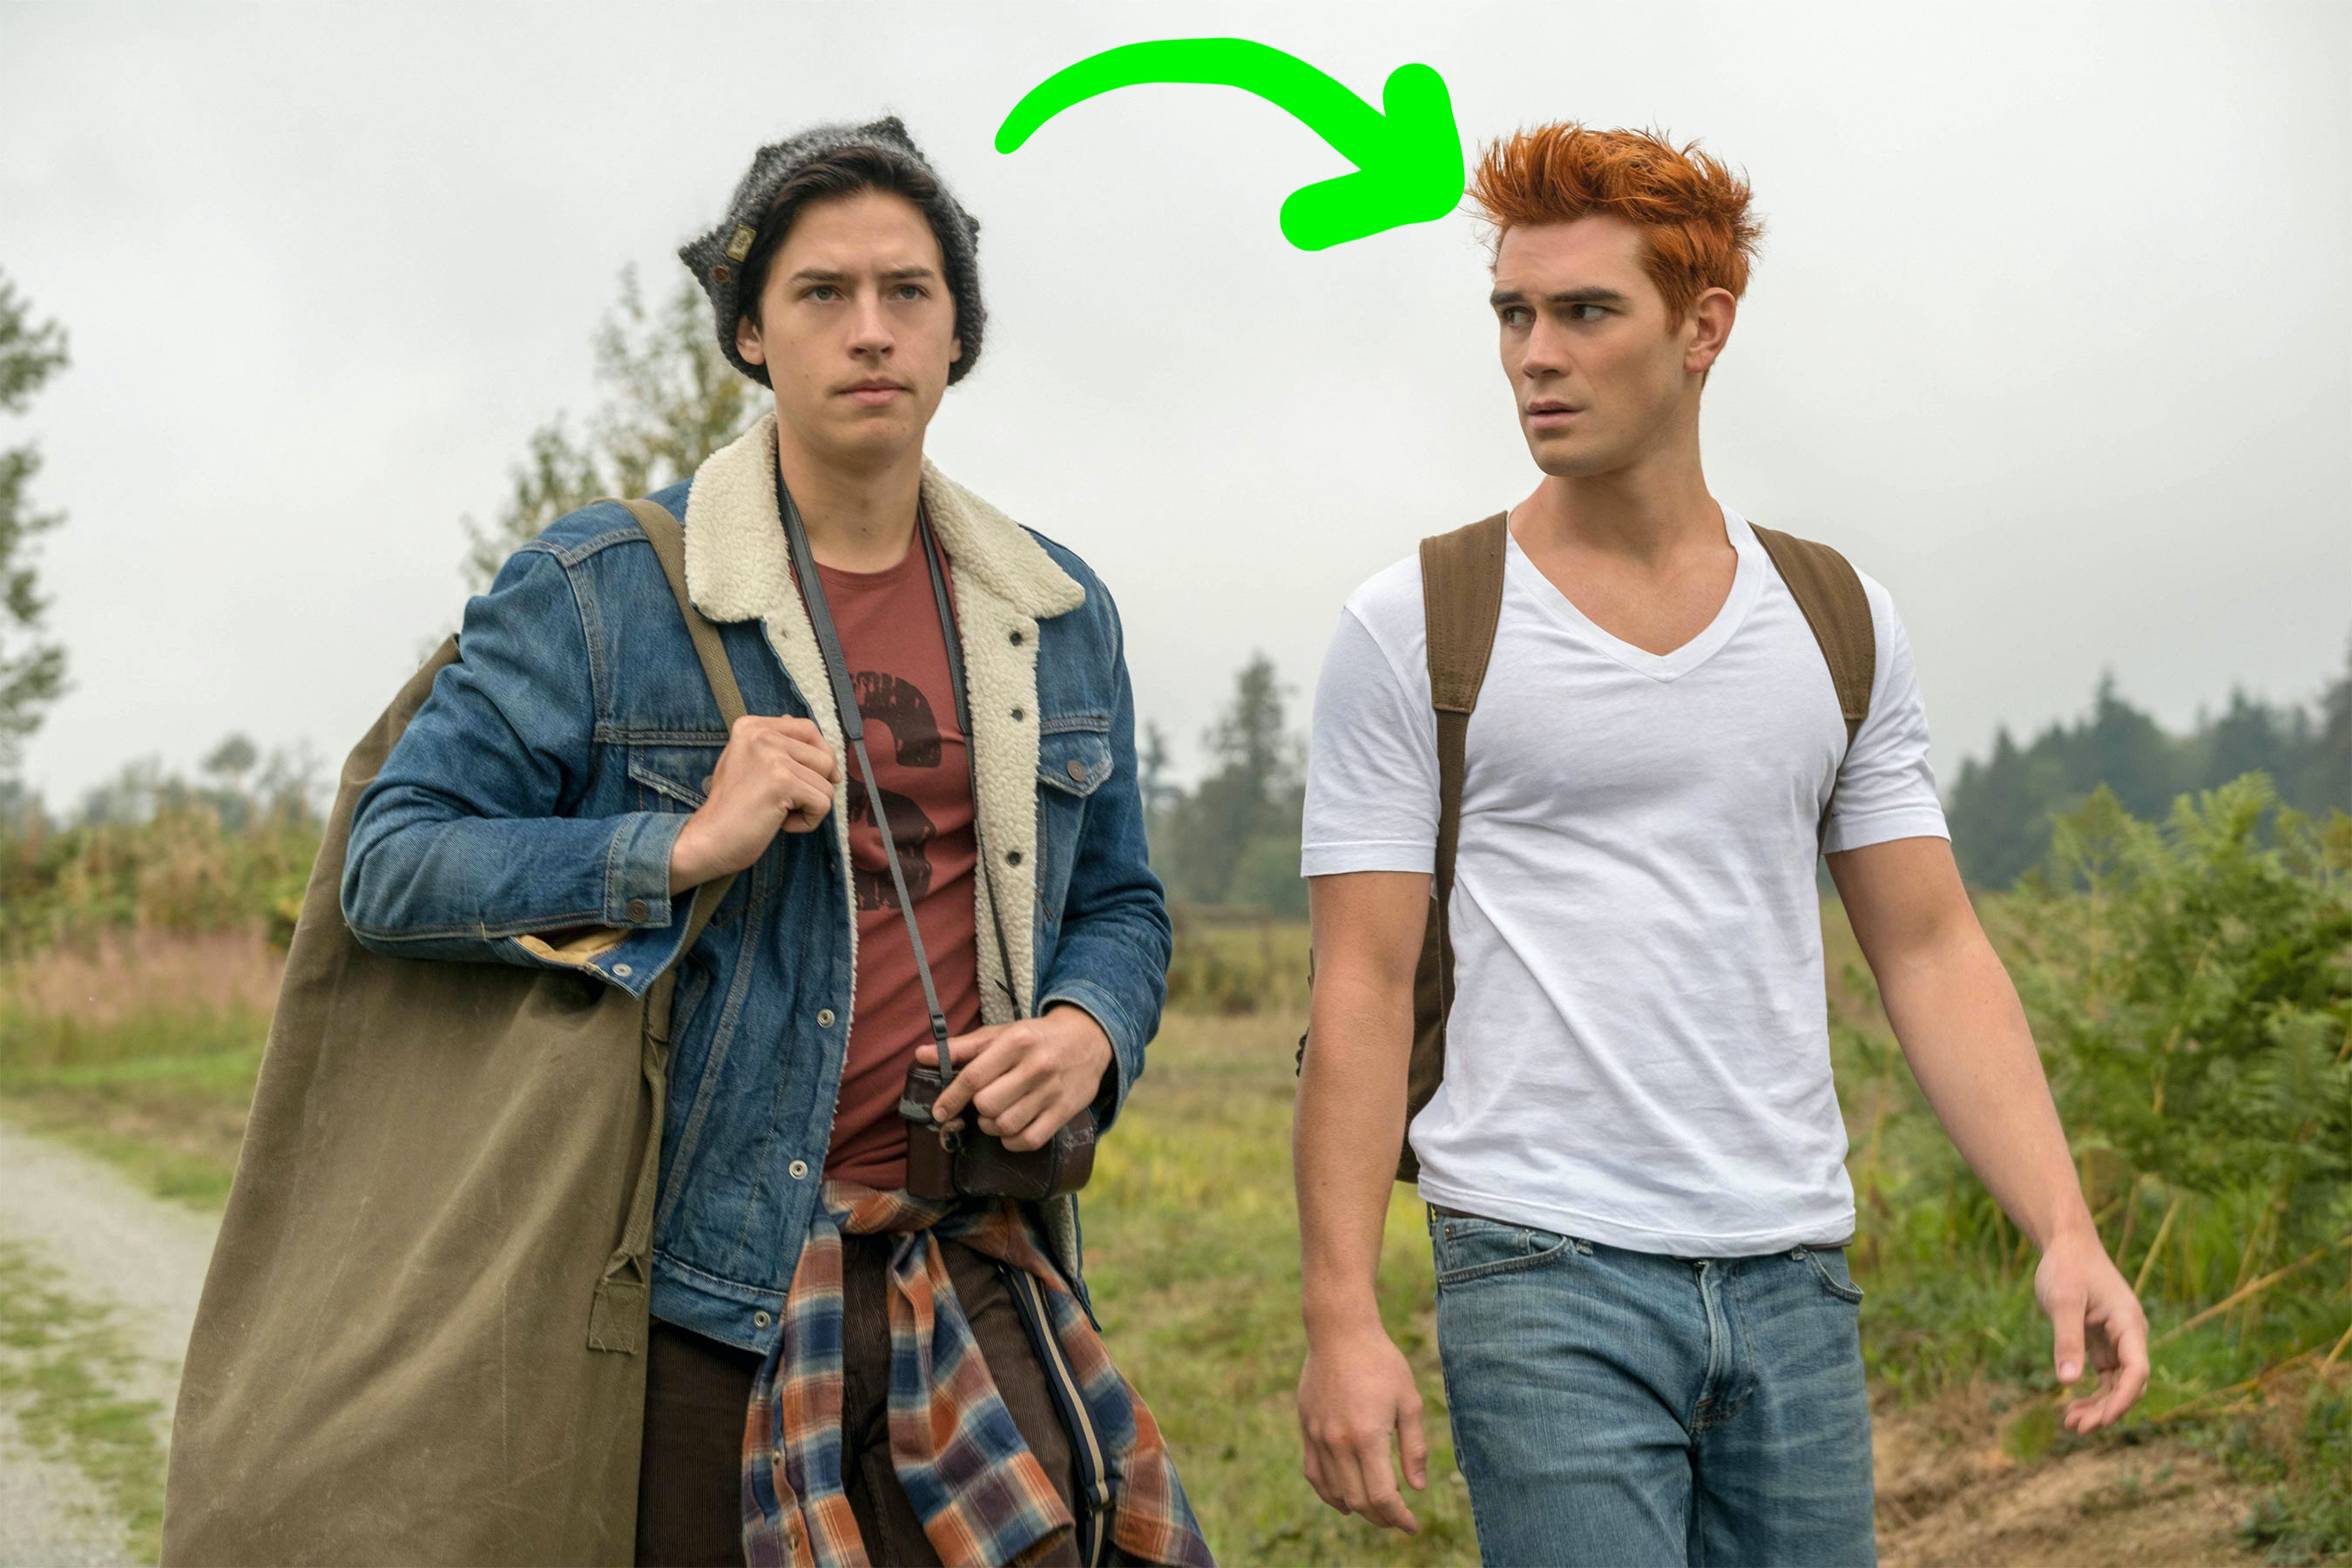 an arrow pointing from Jughead to Archie